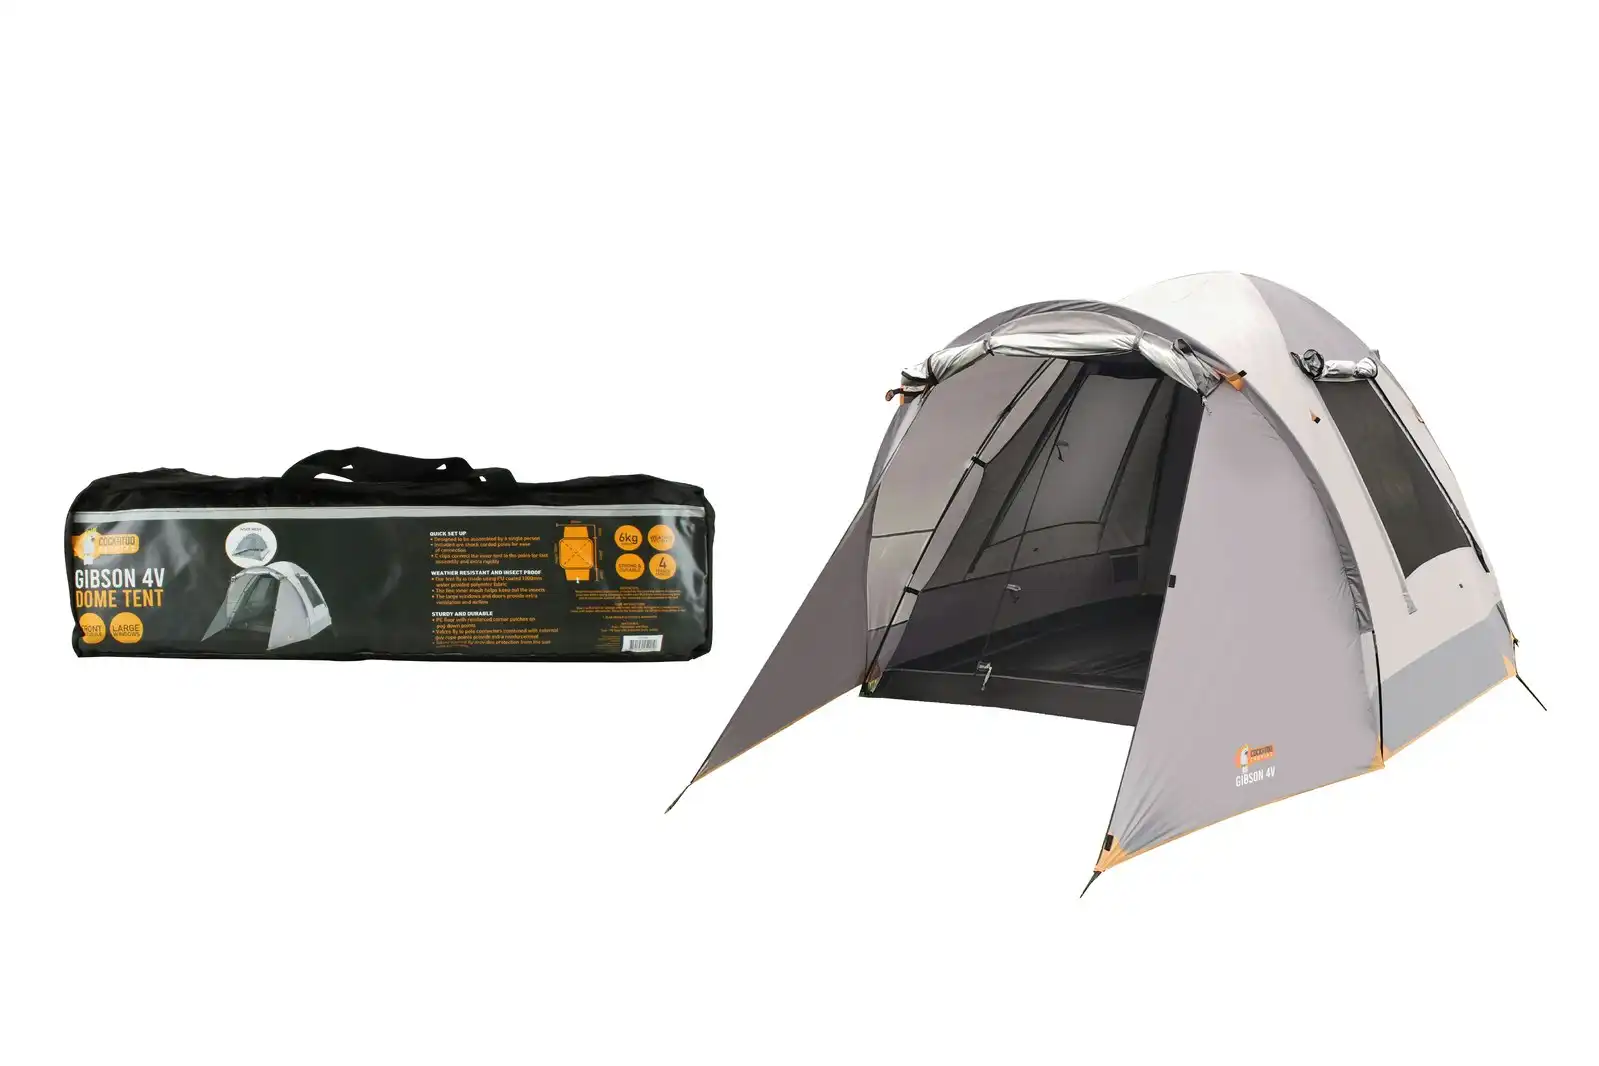 Cockatoo Camping Gibson 4V Dome Tent Waterproof Outdoor Hiking Shelter Grey